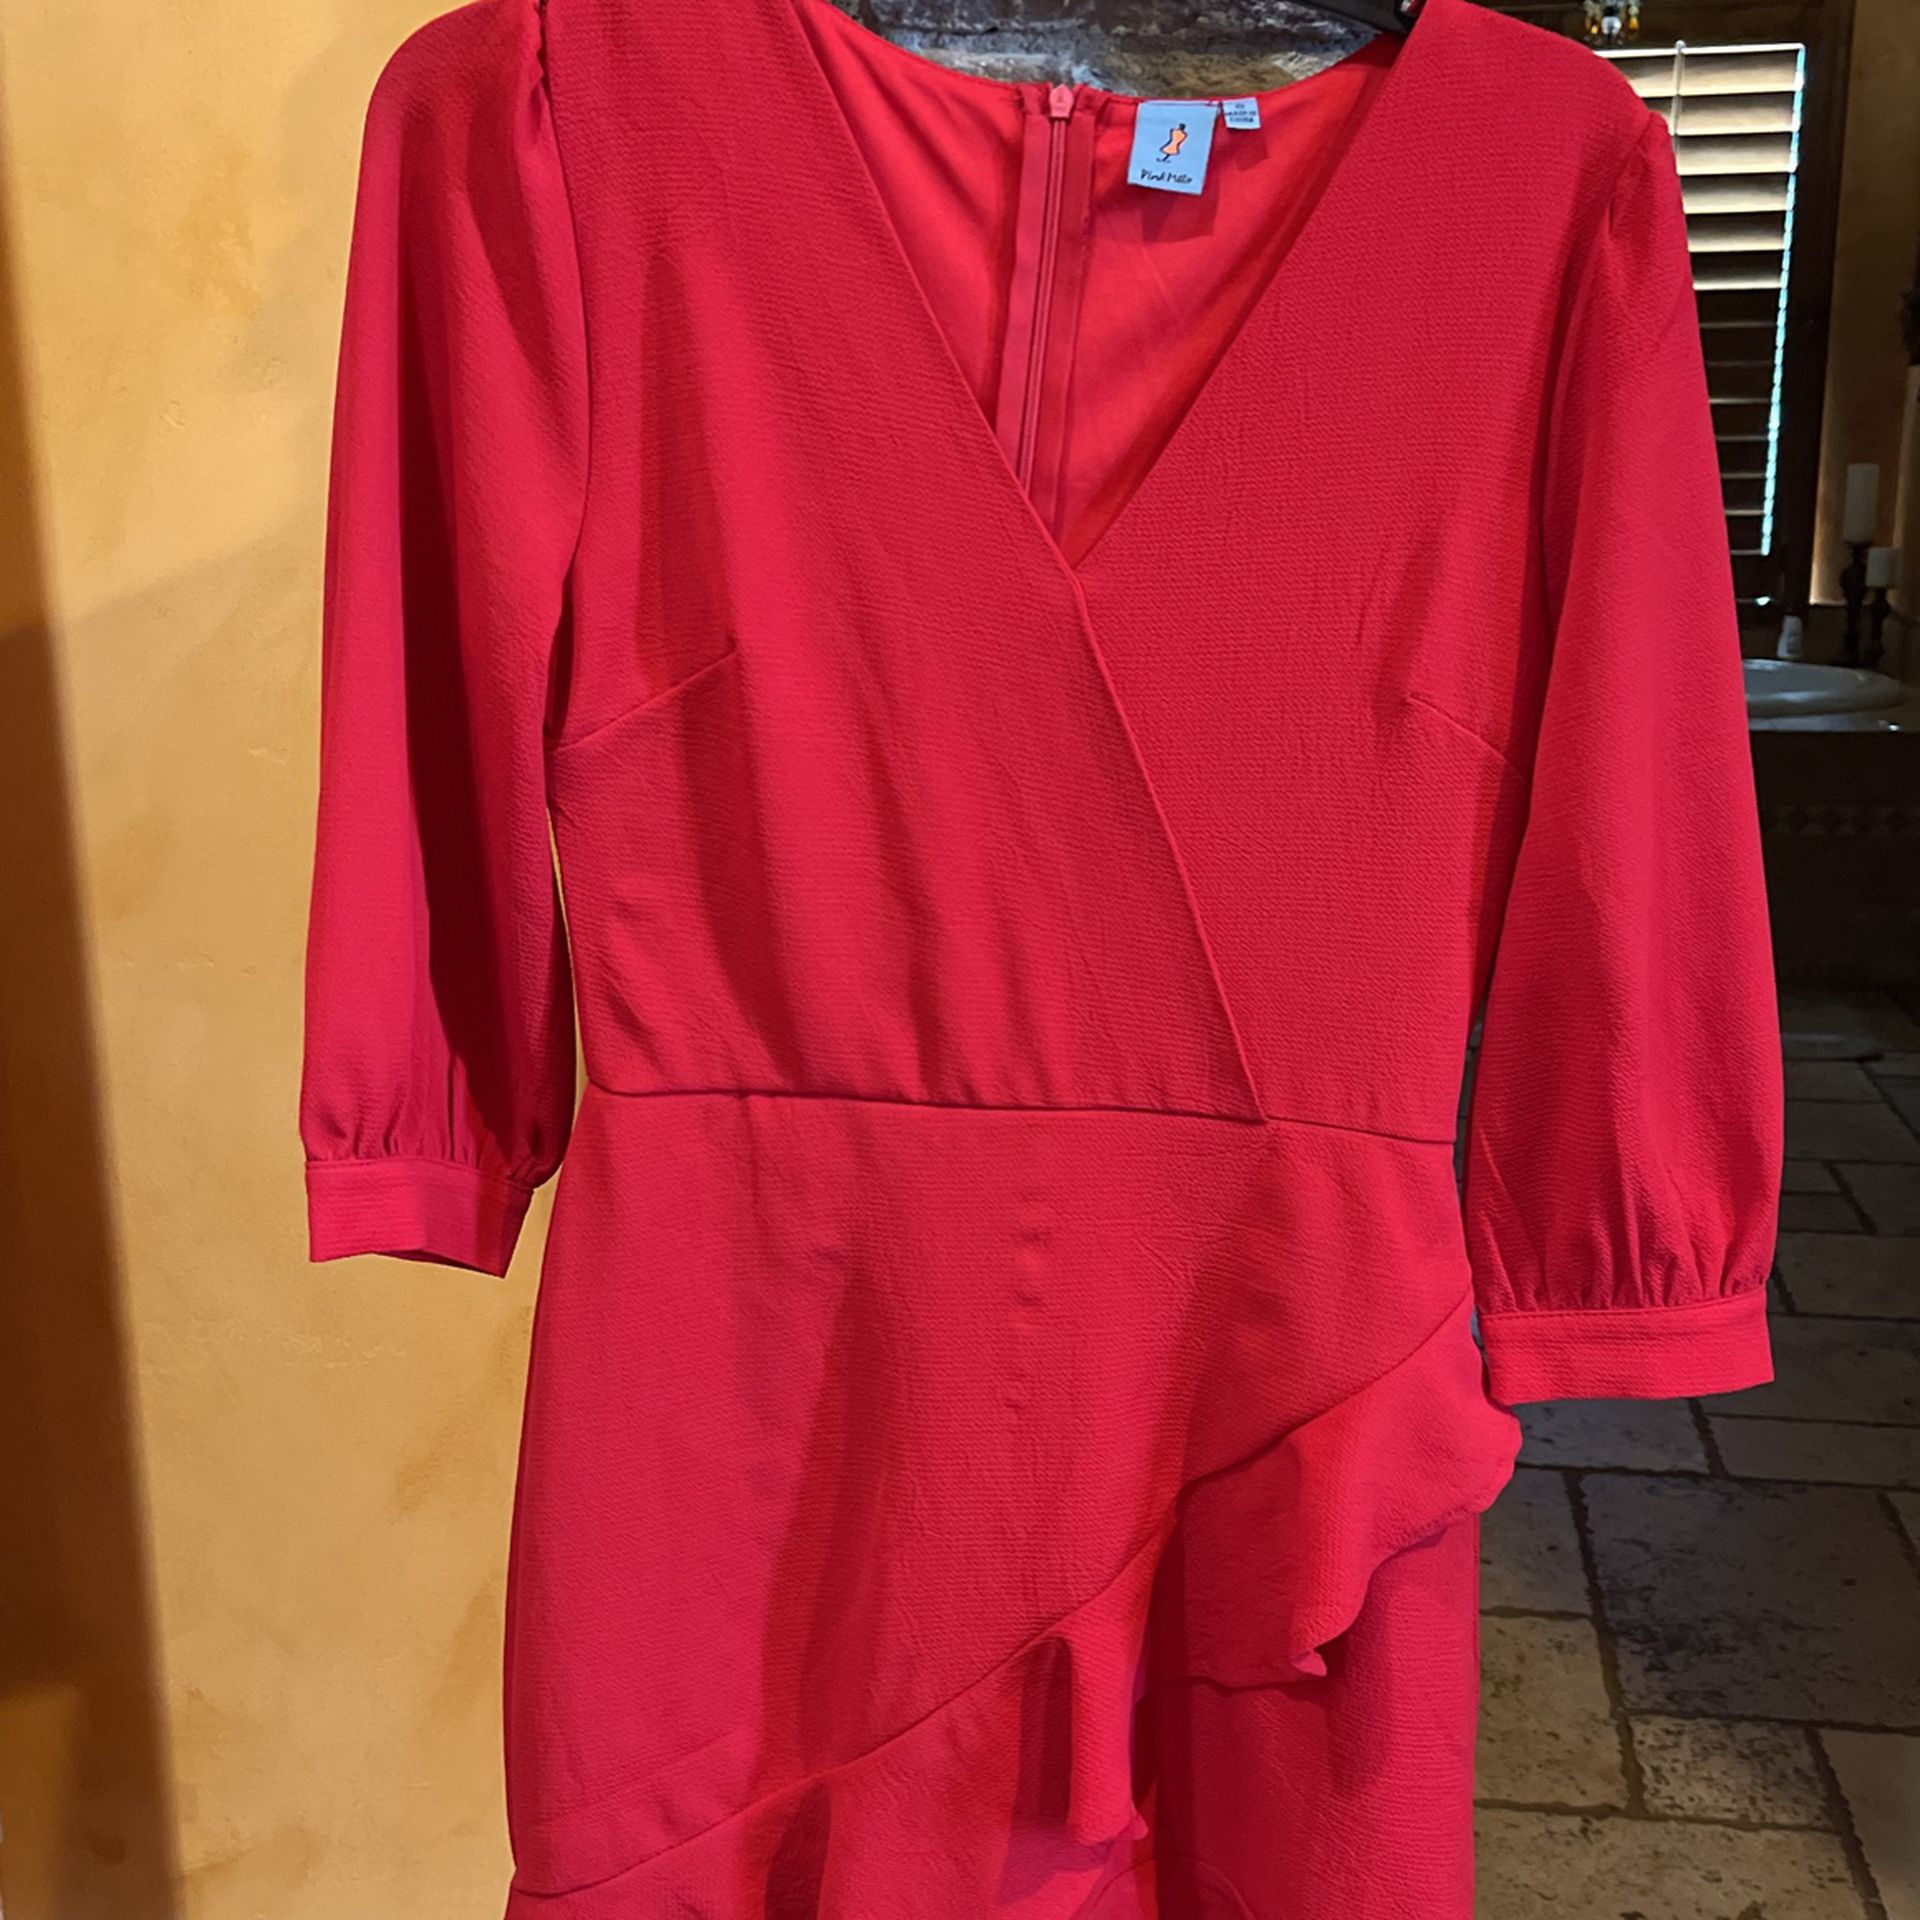 Red Party Dress Size Small Zipper Back  $10  Paid $49